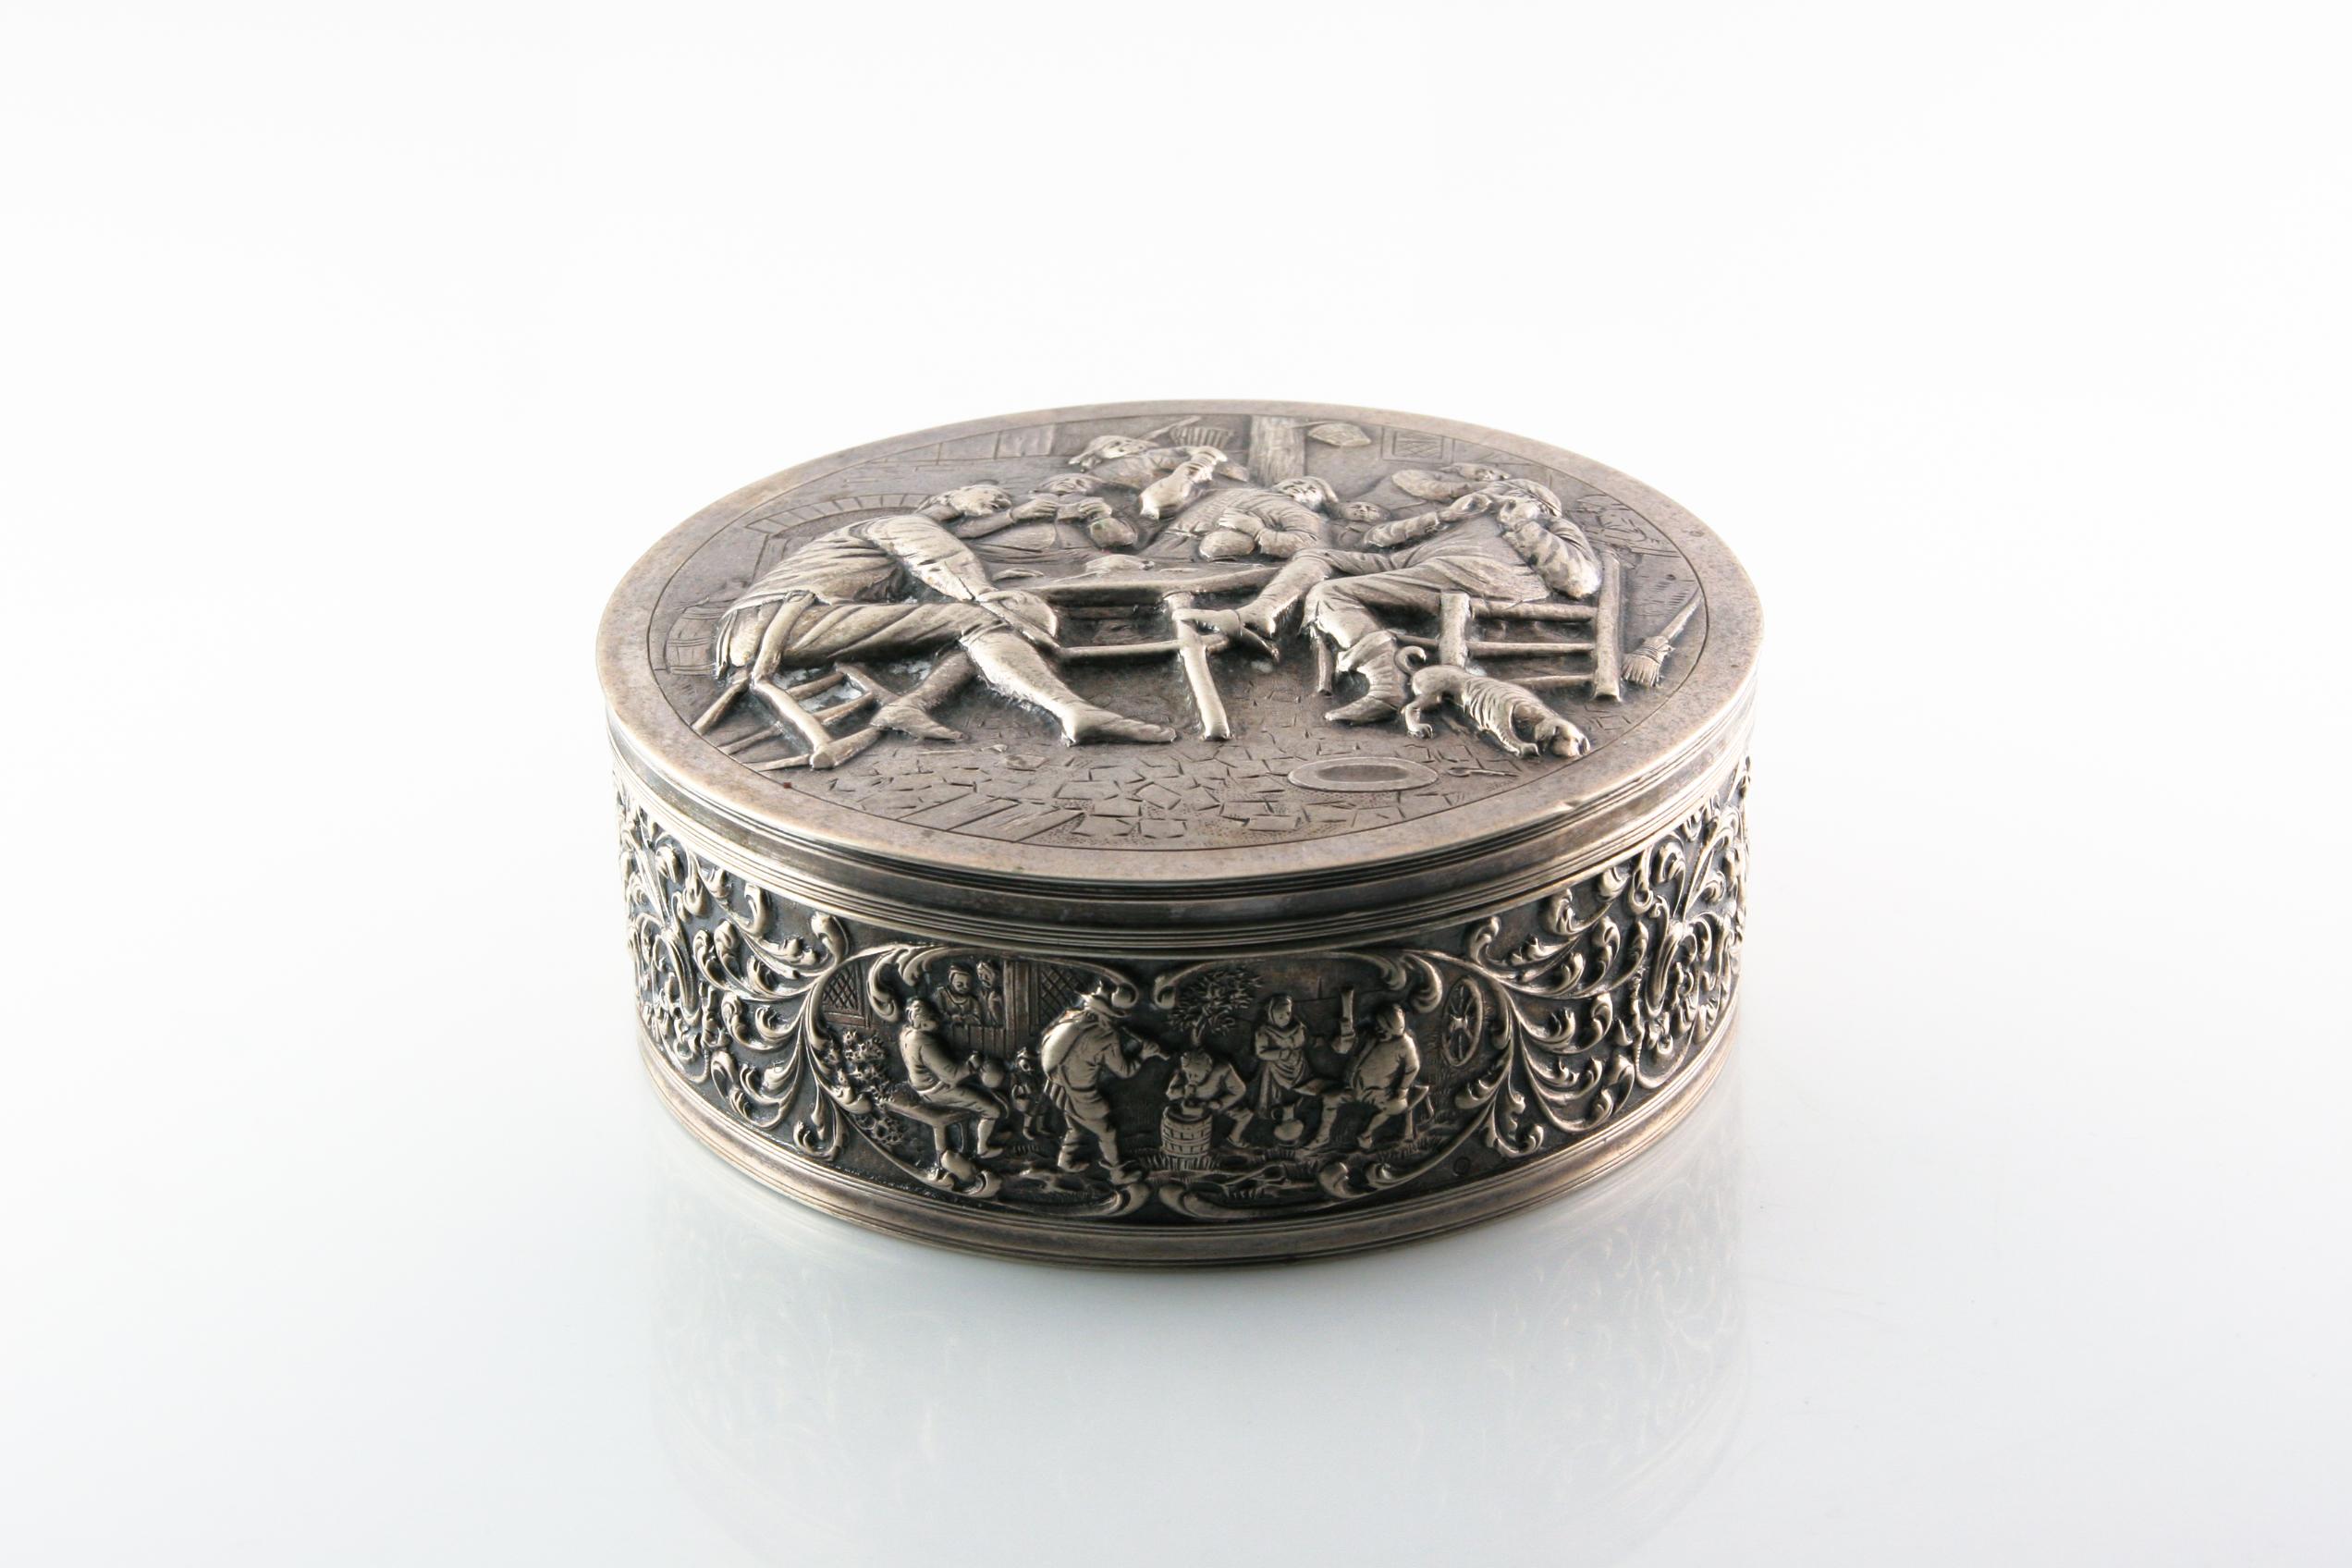 Amazing Handmade Silver Trinket Box
Features Repousse Scene in a Tavern
Box is 5.125